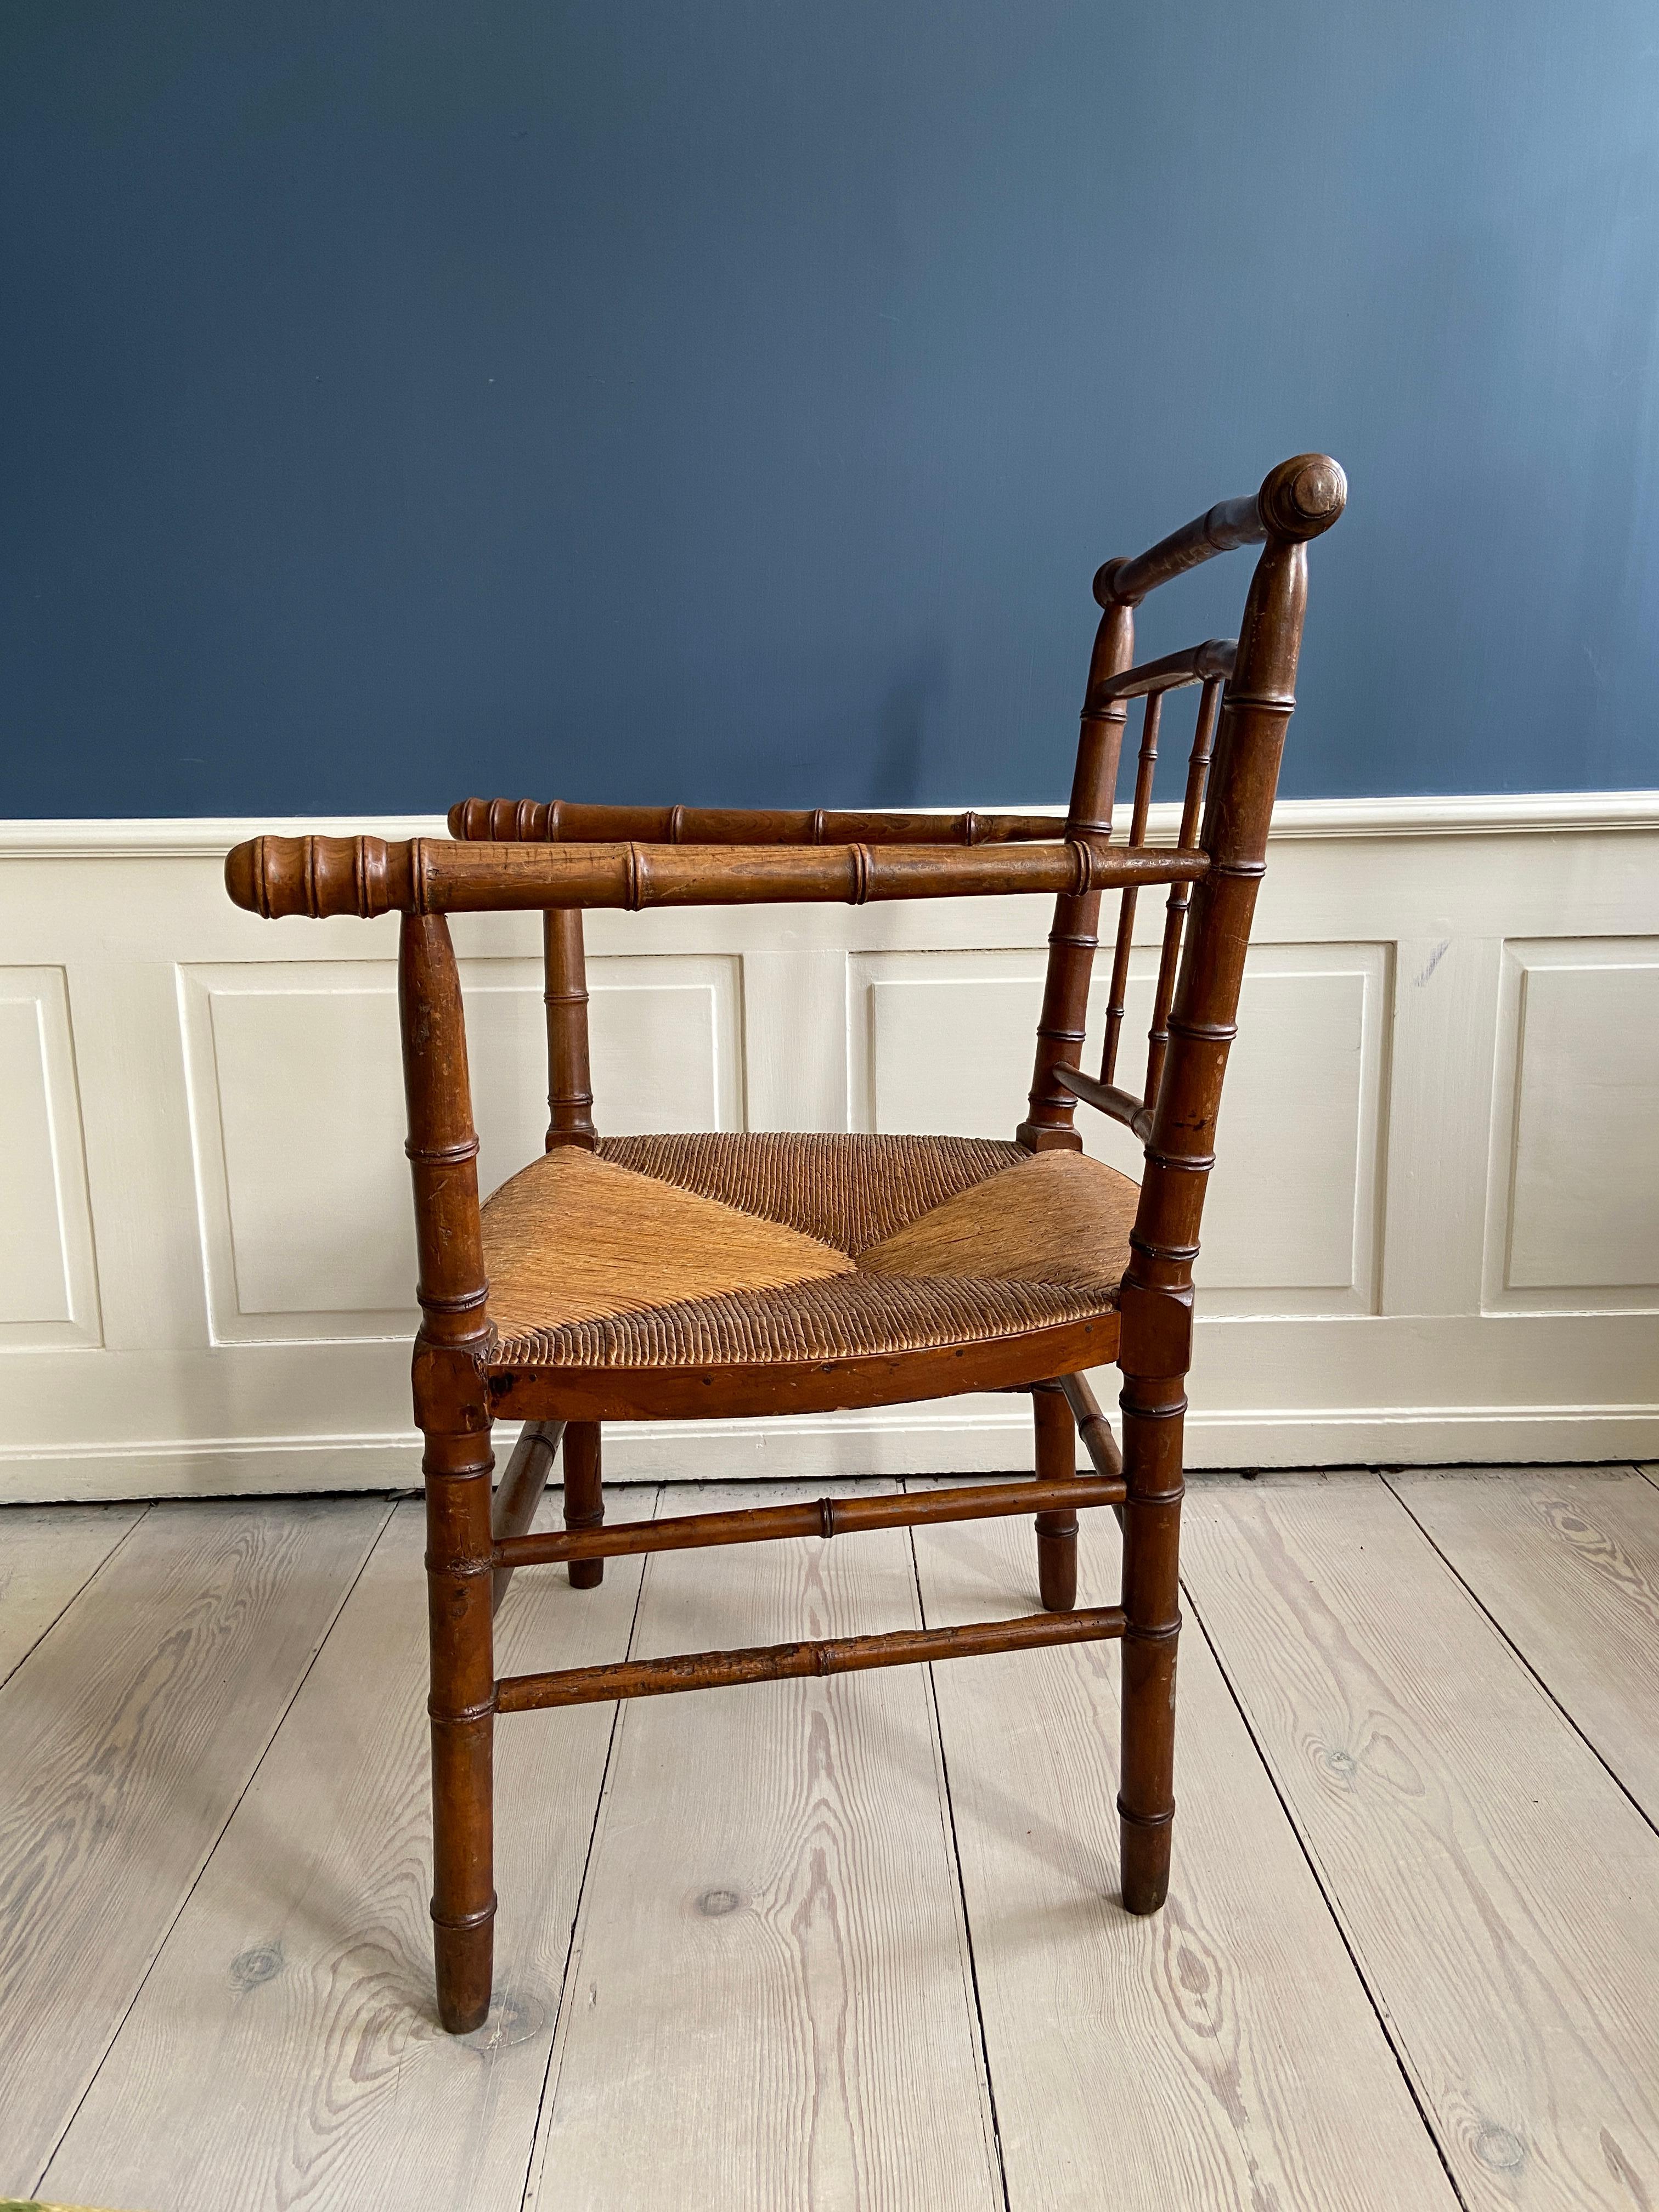 Vintage Armchair in Faux Bamboo and Wicker Seat, France, Early 20th Century For Sale 4